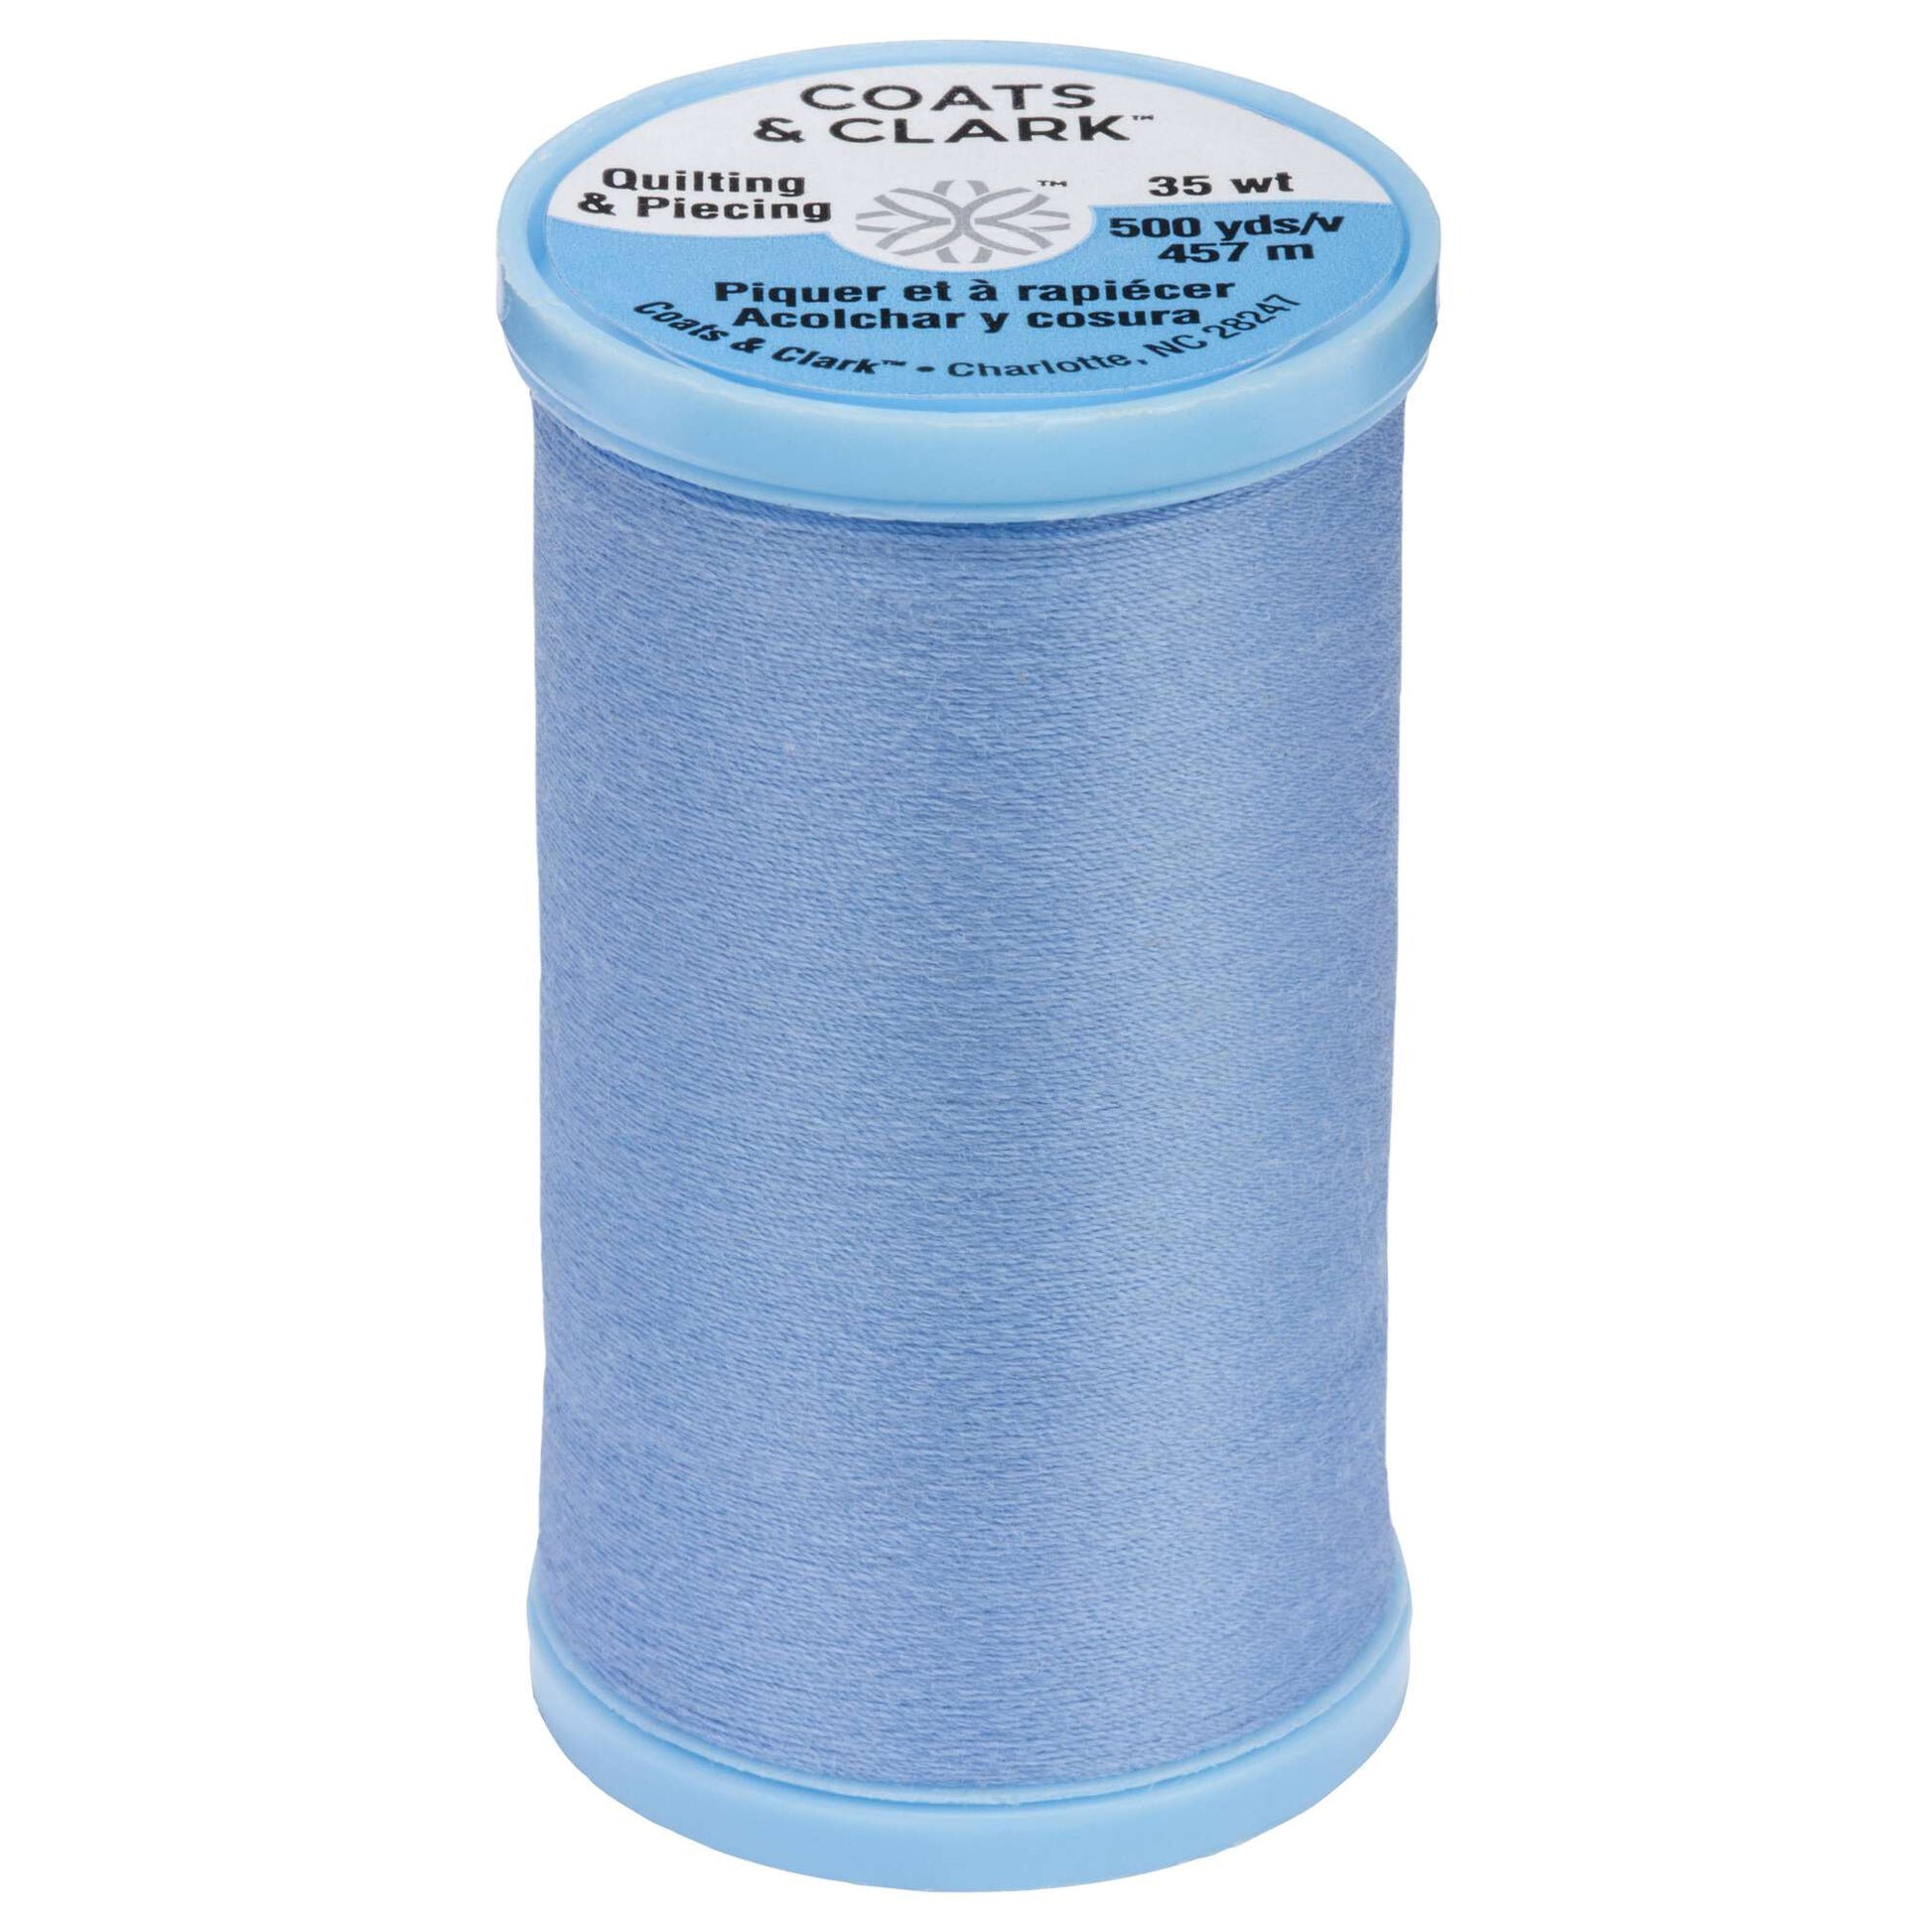 Coats & Clark Cotton Covered Quilting & Piecing Thread (500 Yards) September Sky